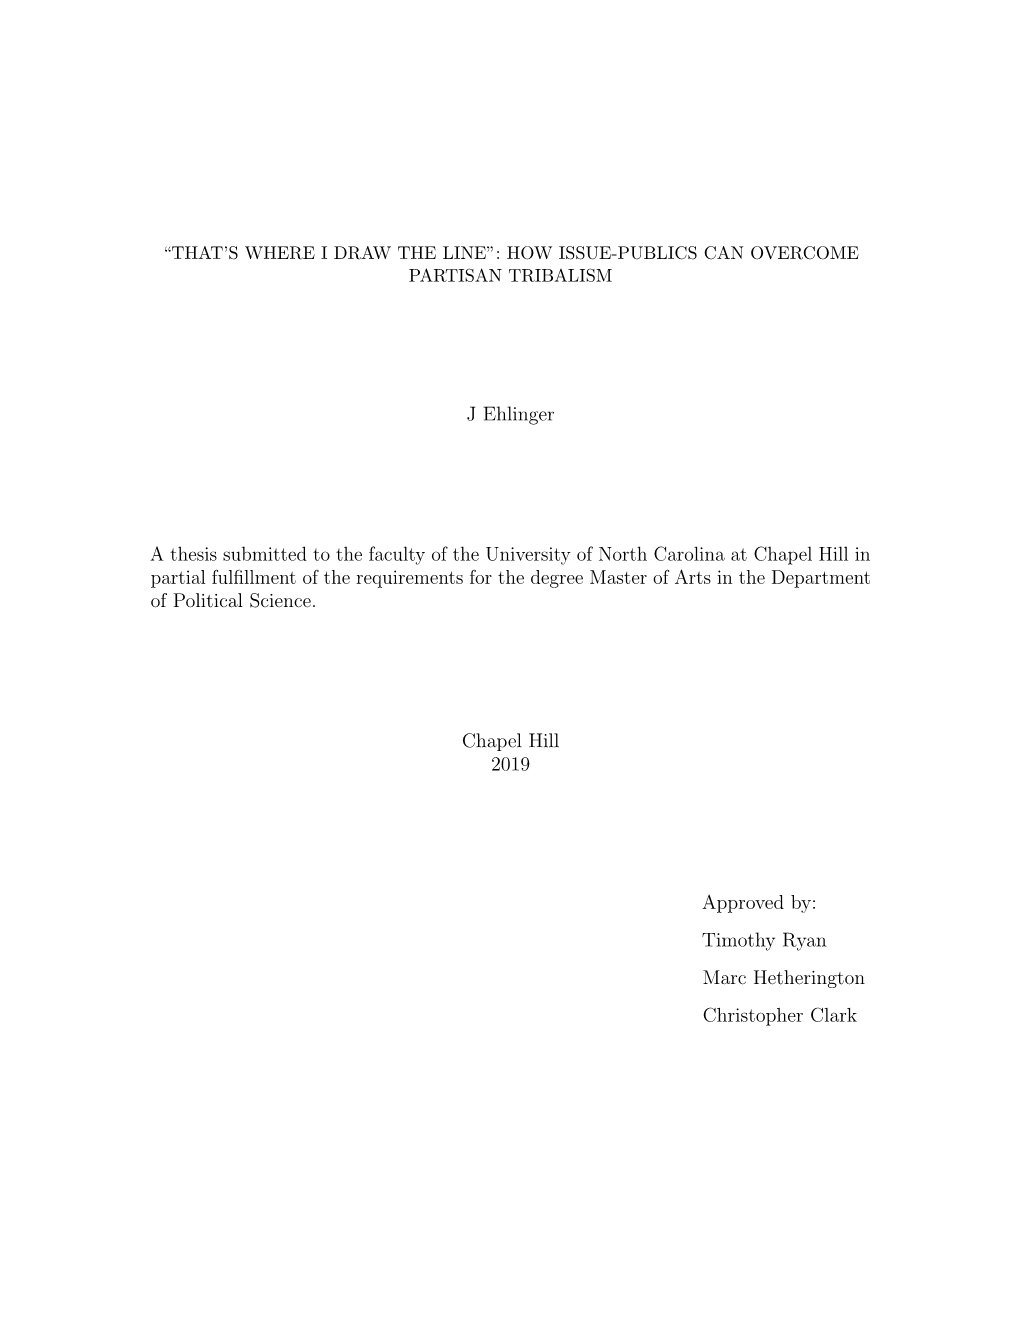 J Ehlinger a Thesis Submitted to the Faculty of the University of North